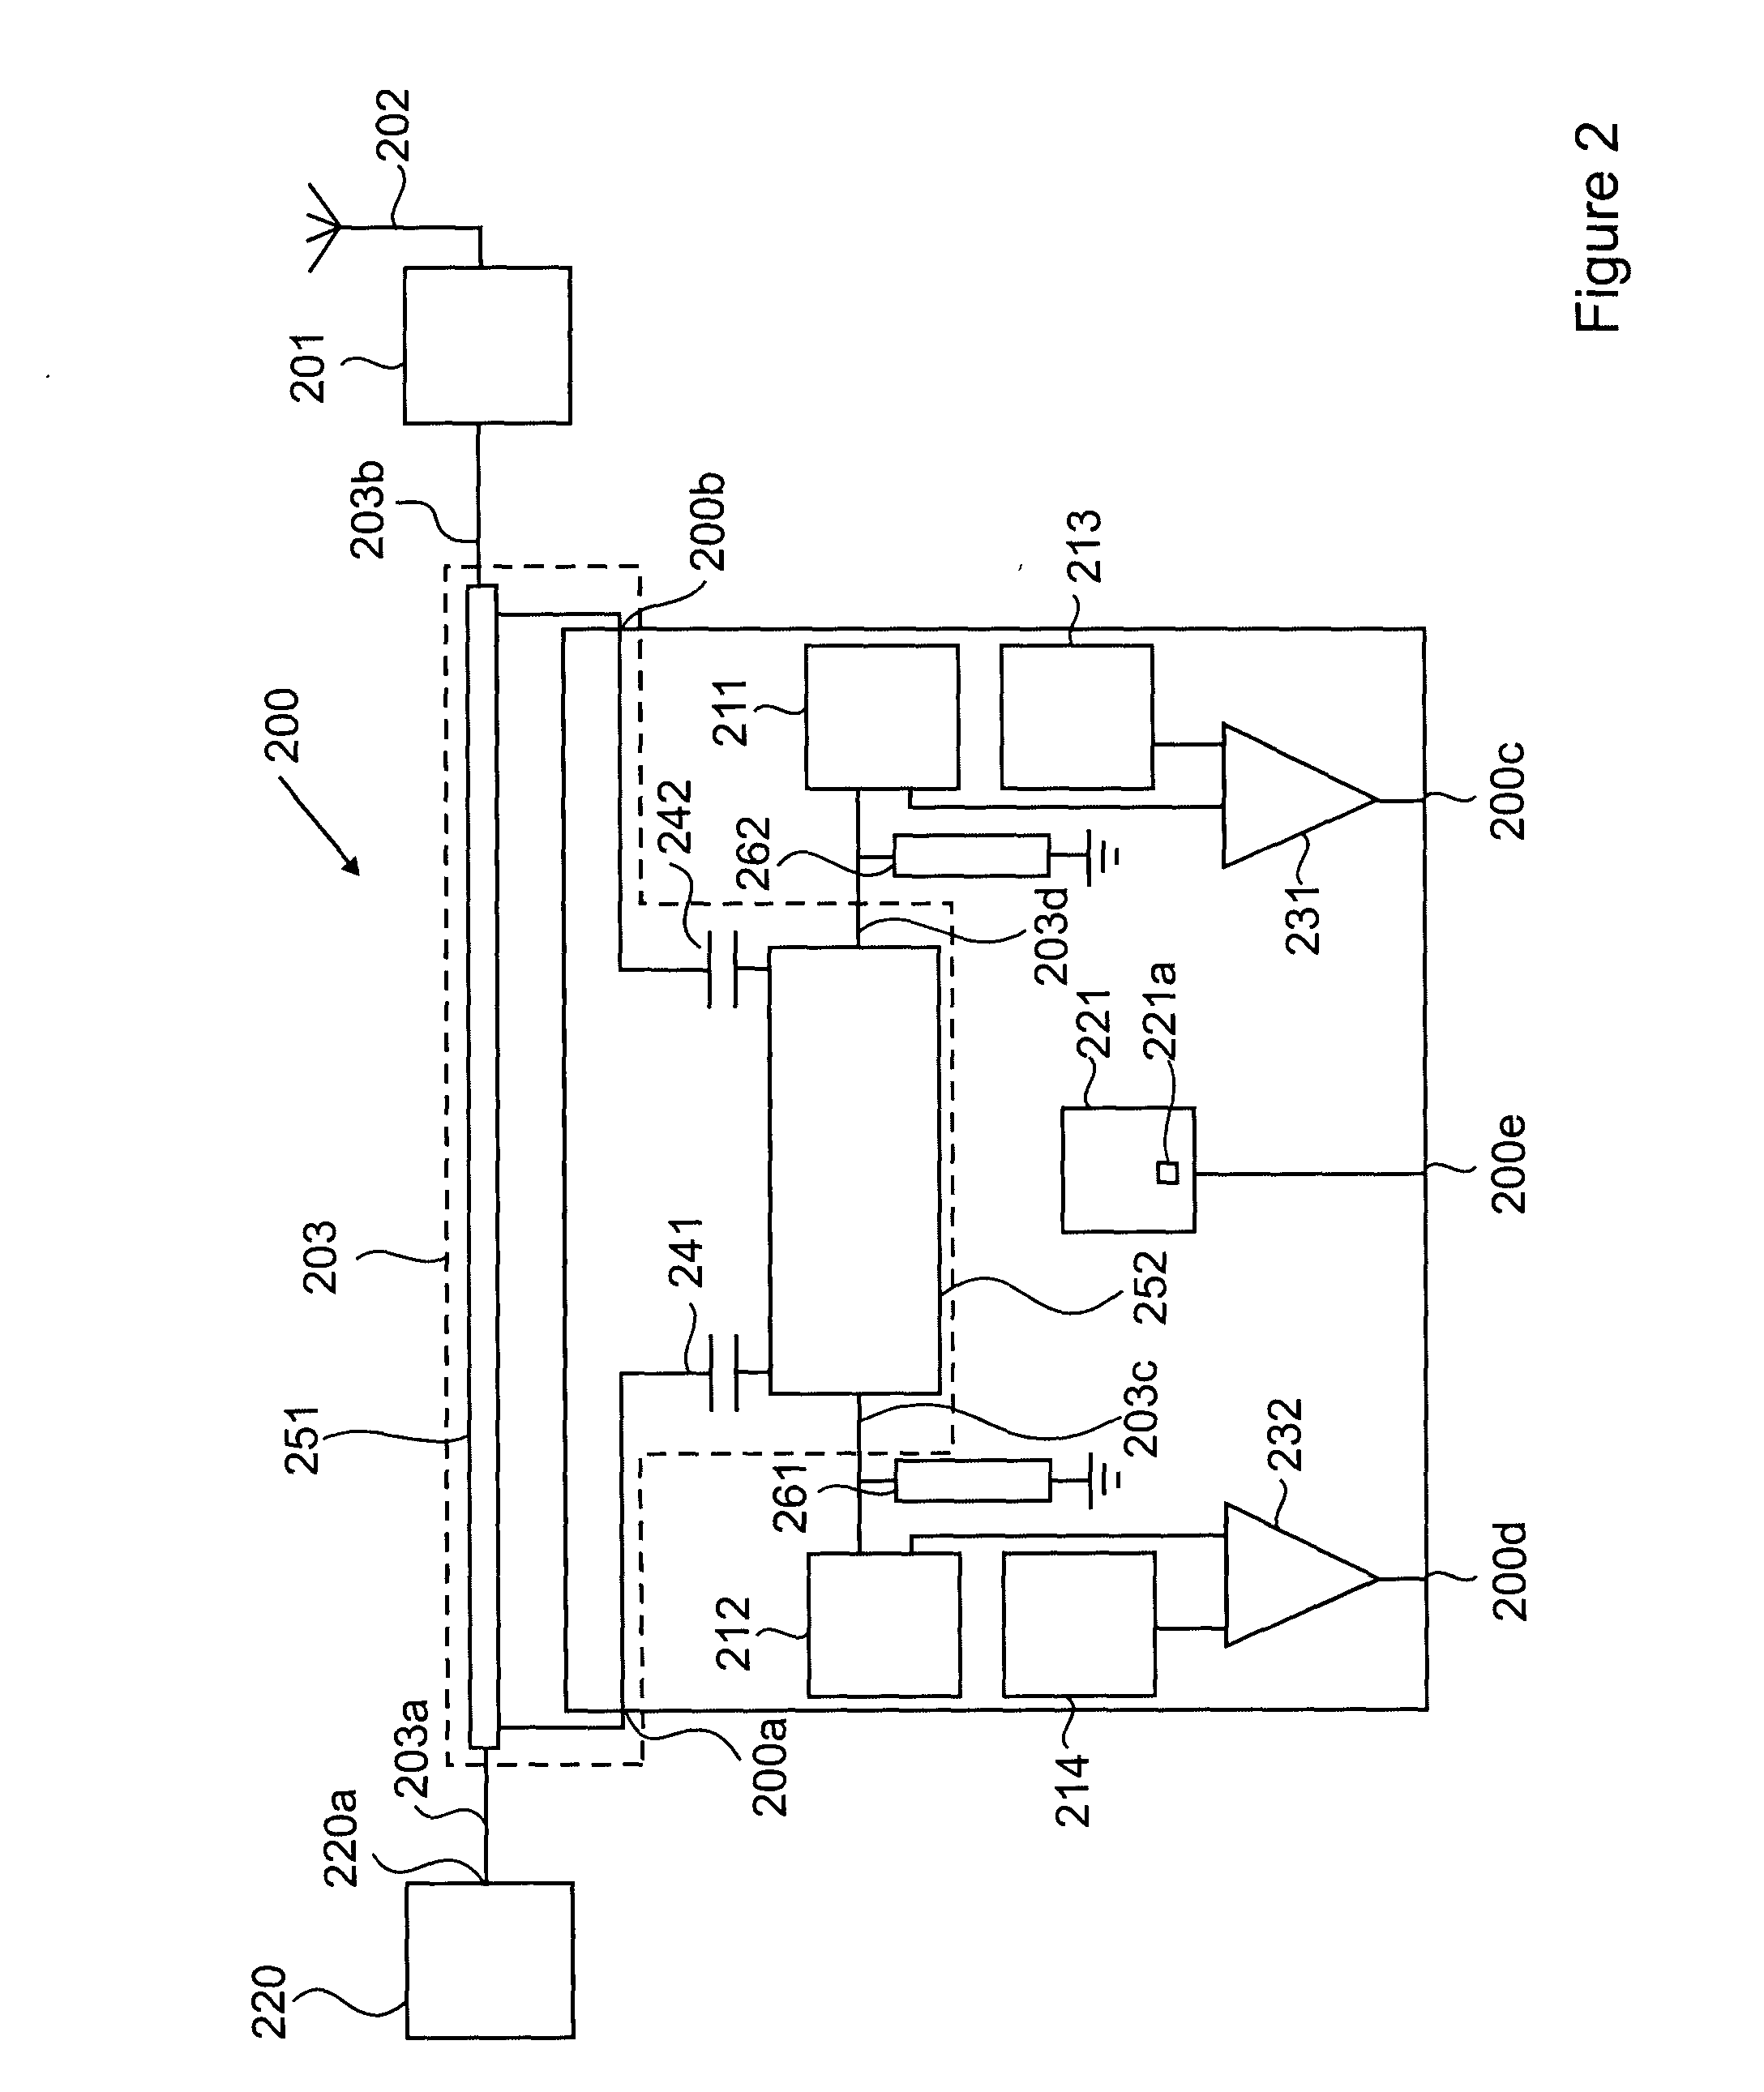 Power transfer measurement circuit for wireless systems